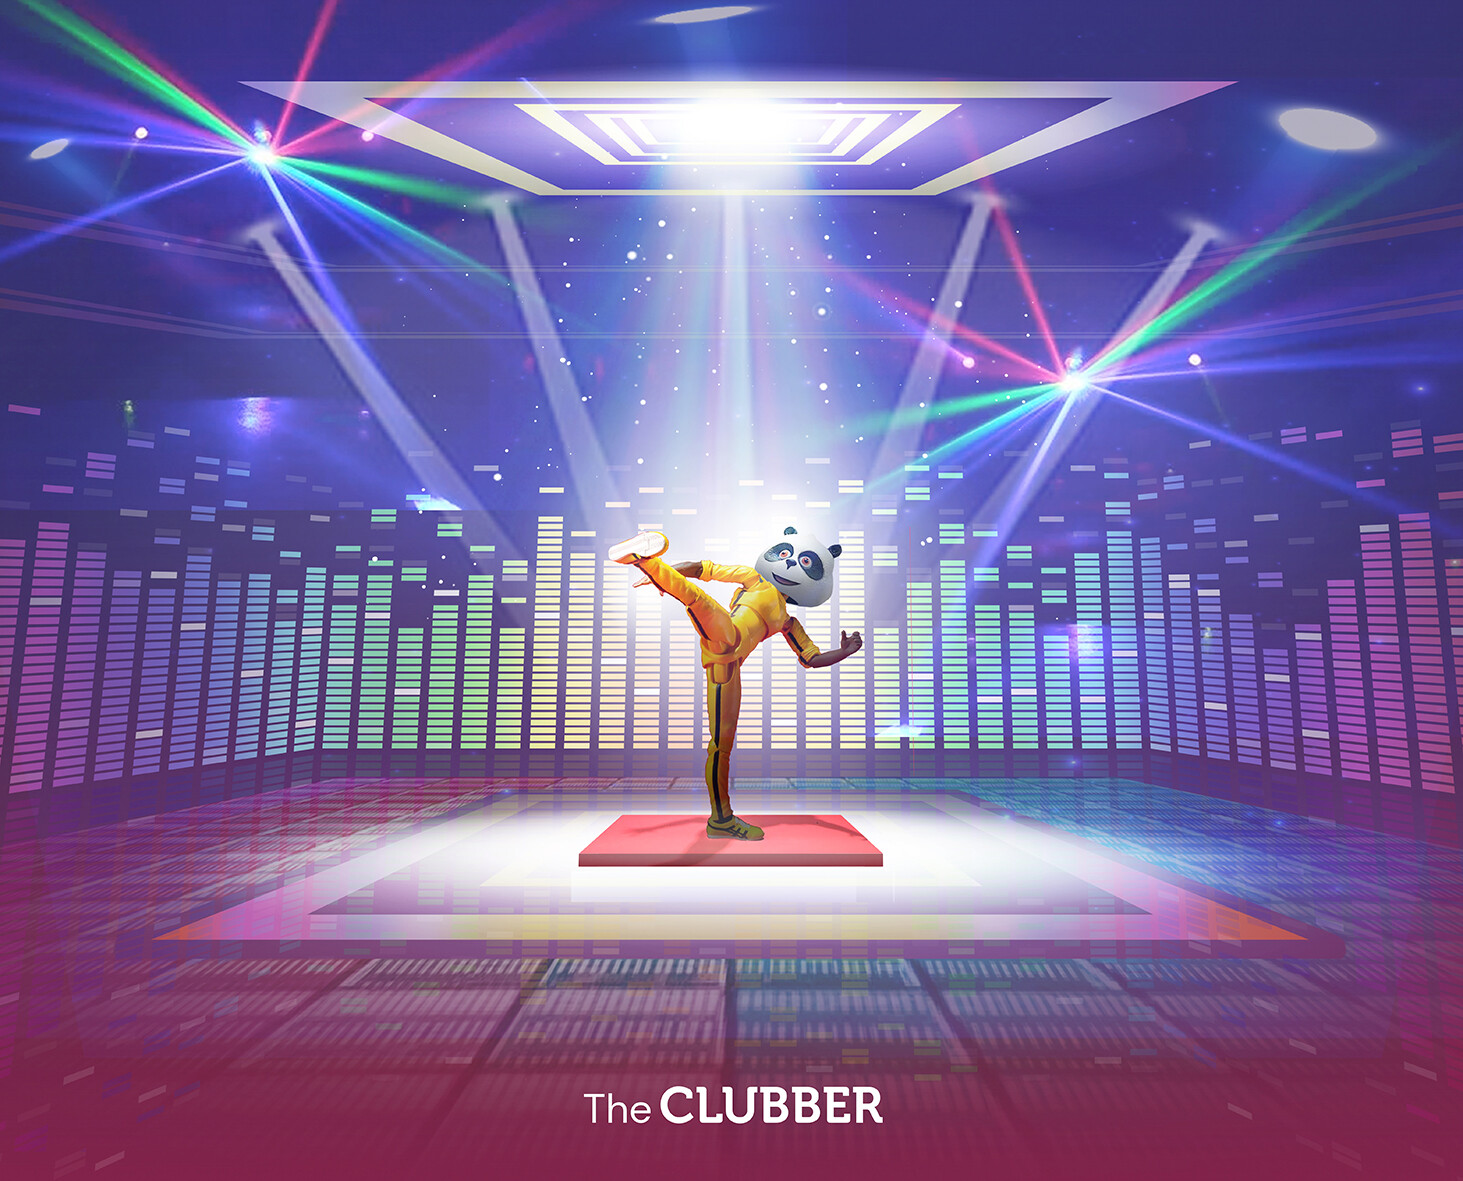 The Clubber: all sounds and lasers